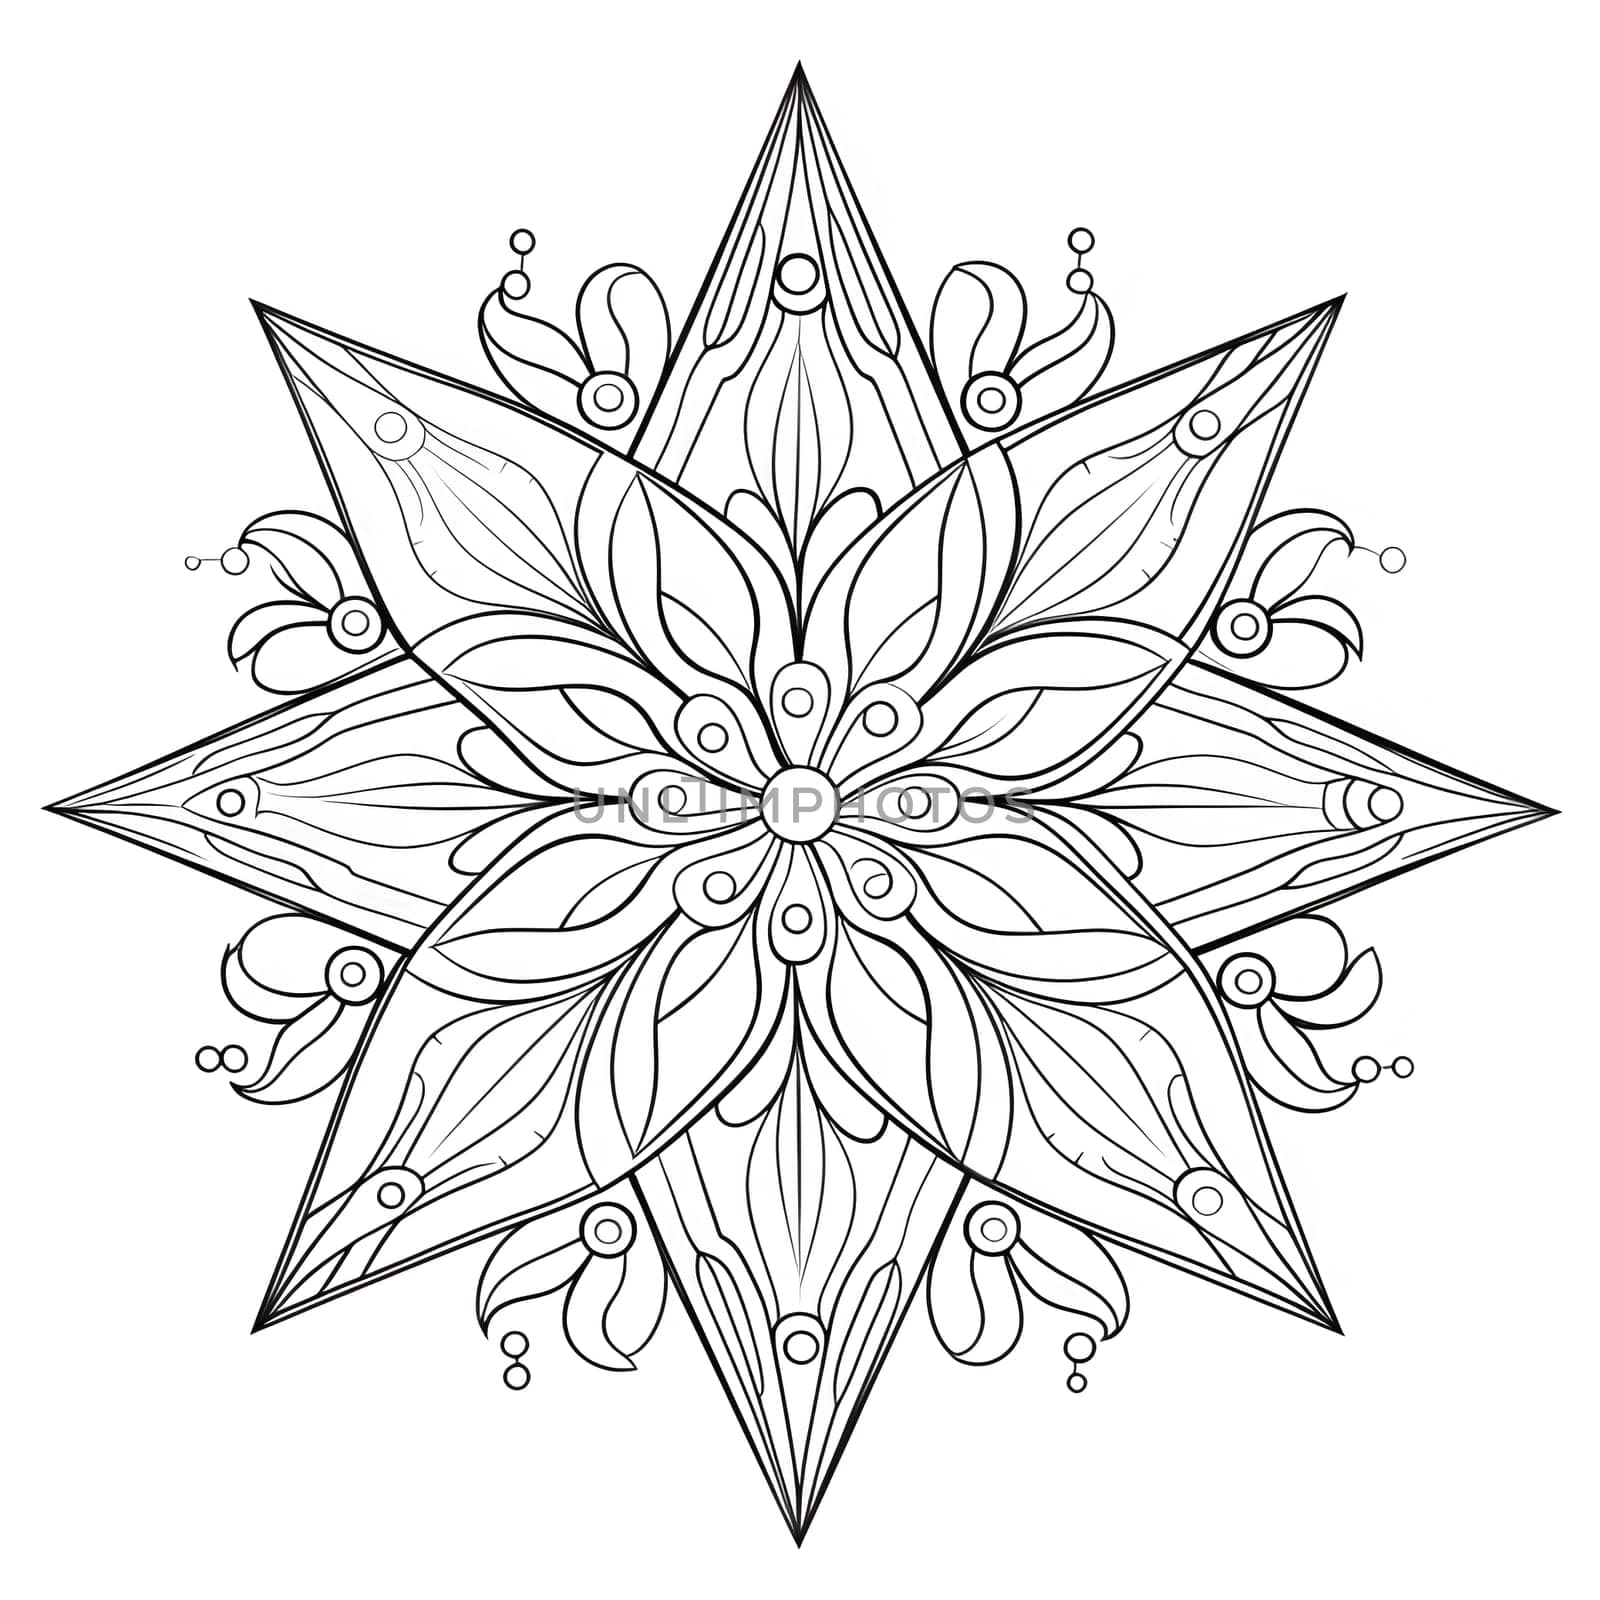 Christmas star as a black and white coloring card. The Christmas star as a symbol of the birth of the savior. by ThemesS